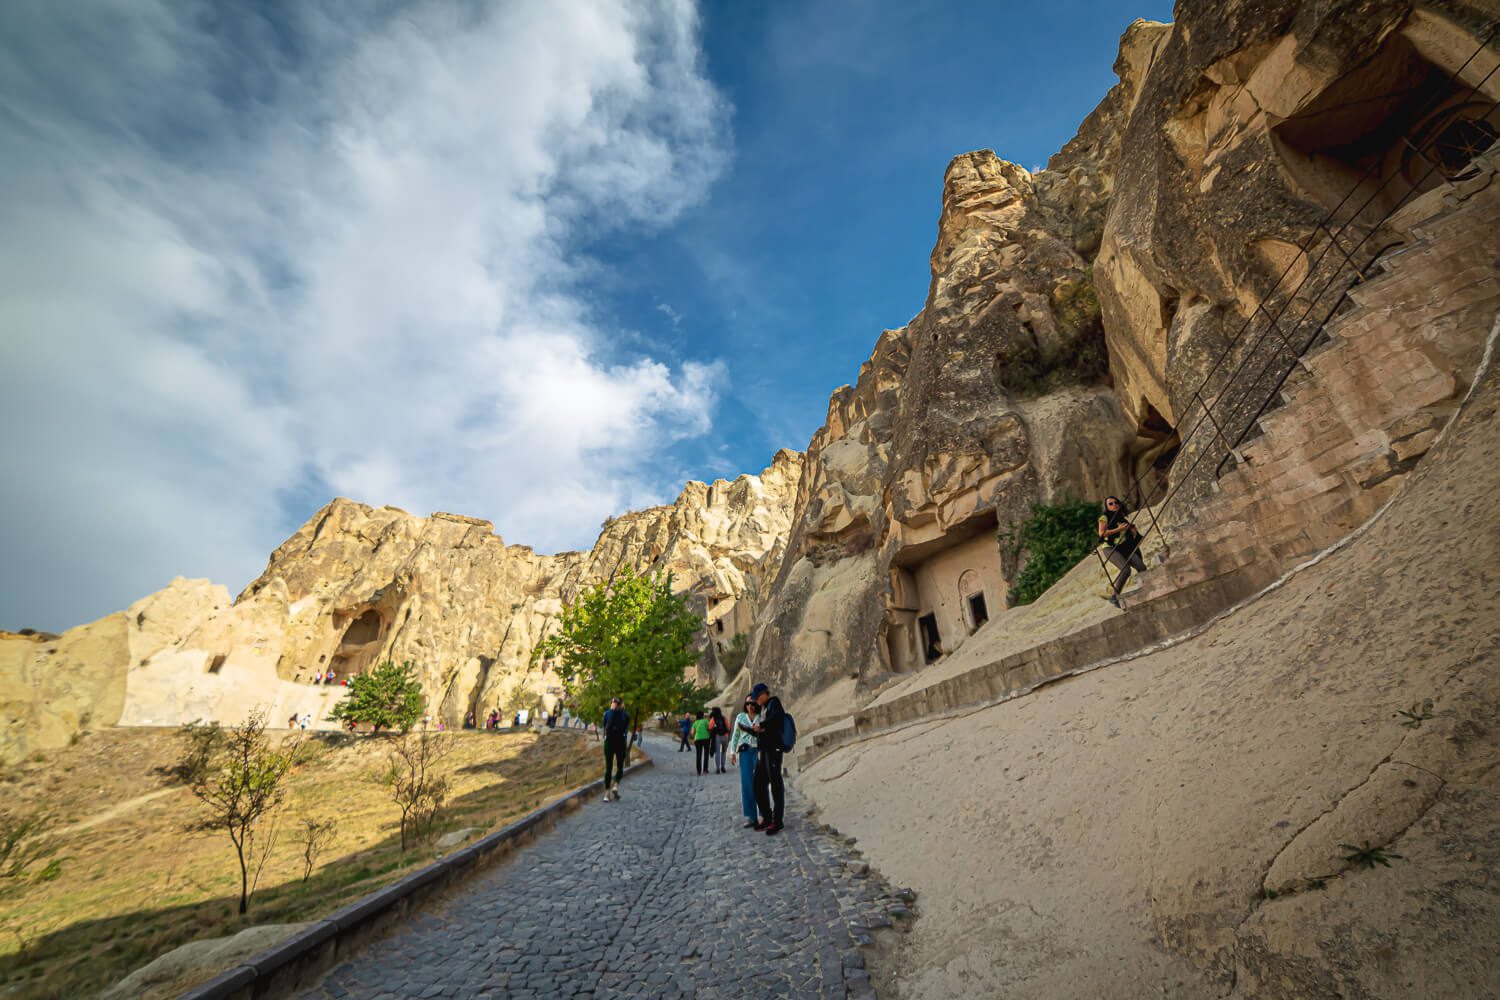 The pathway inside the Goreme Open Air Museum